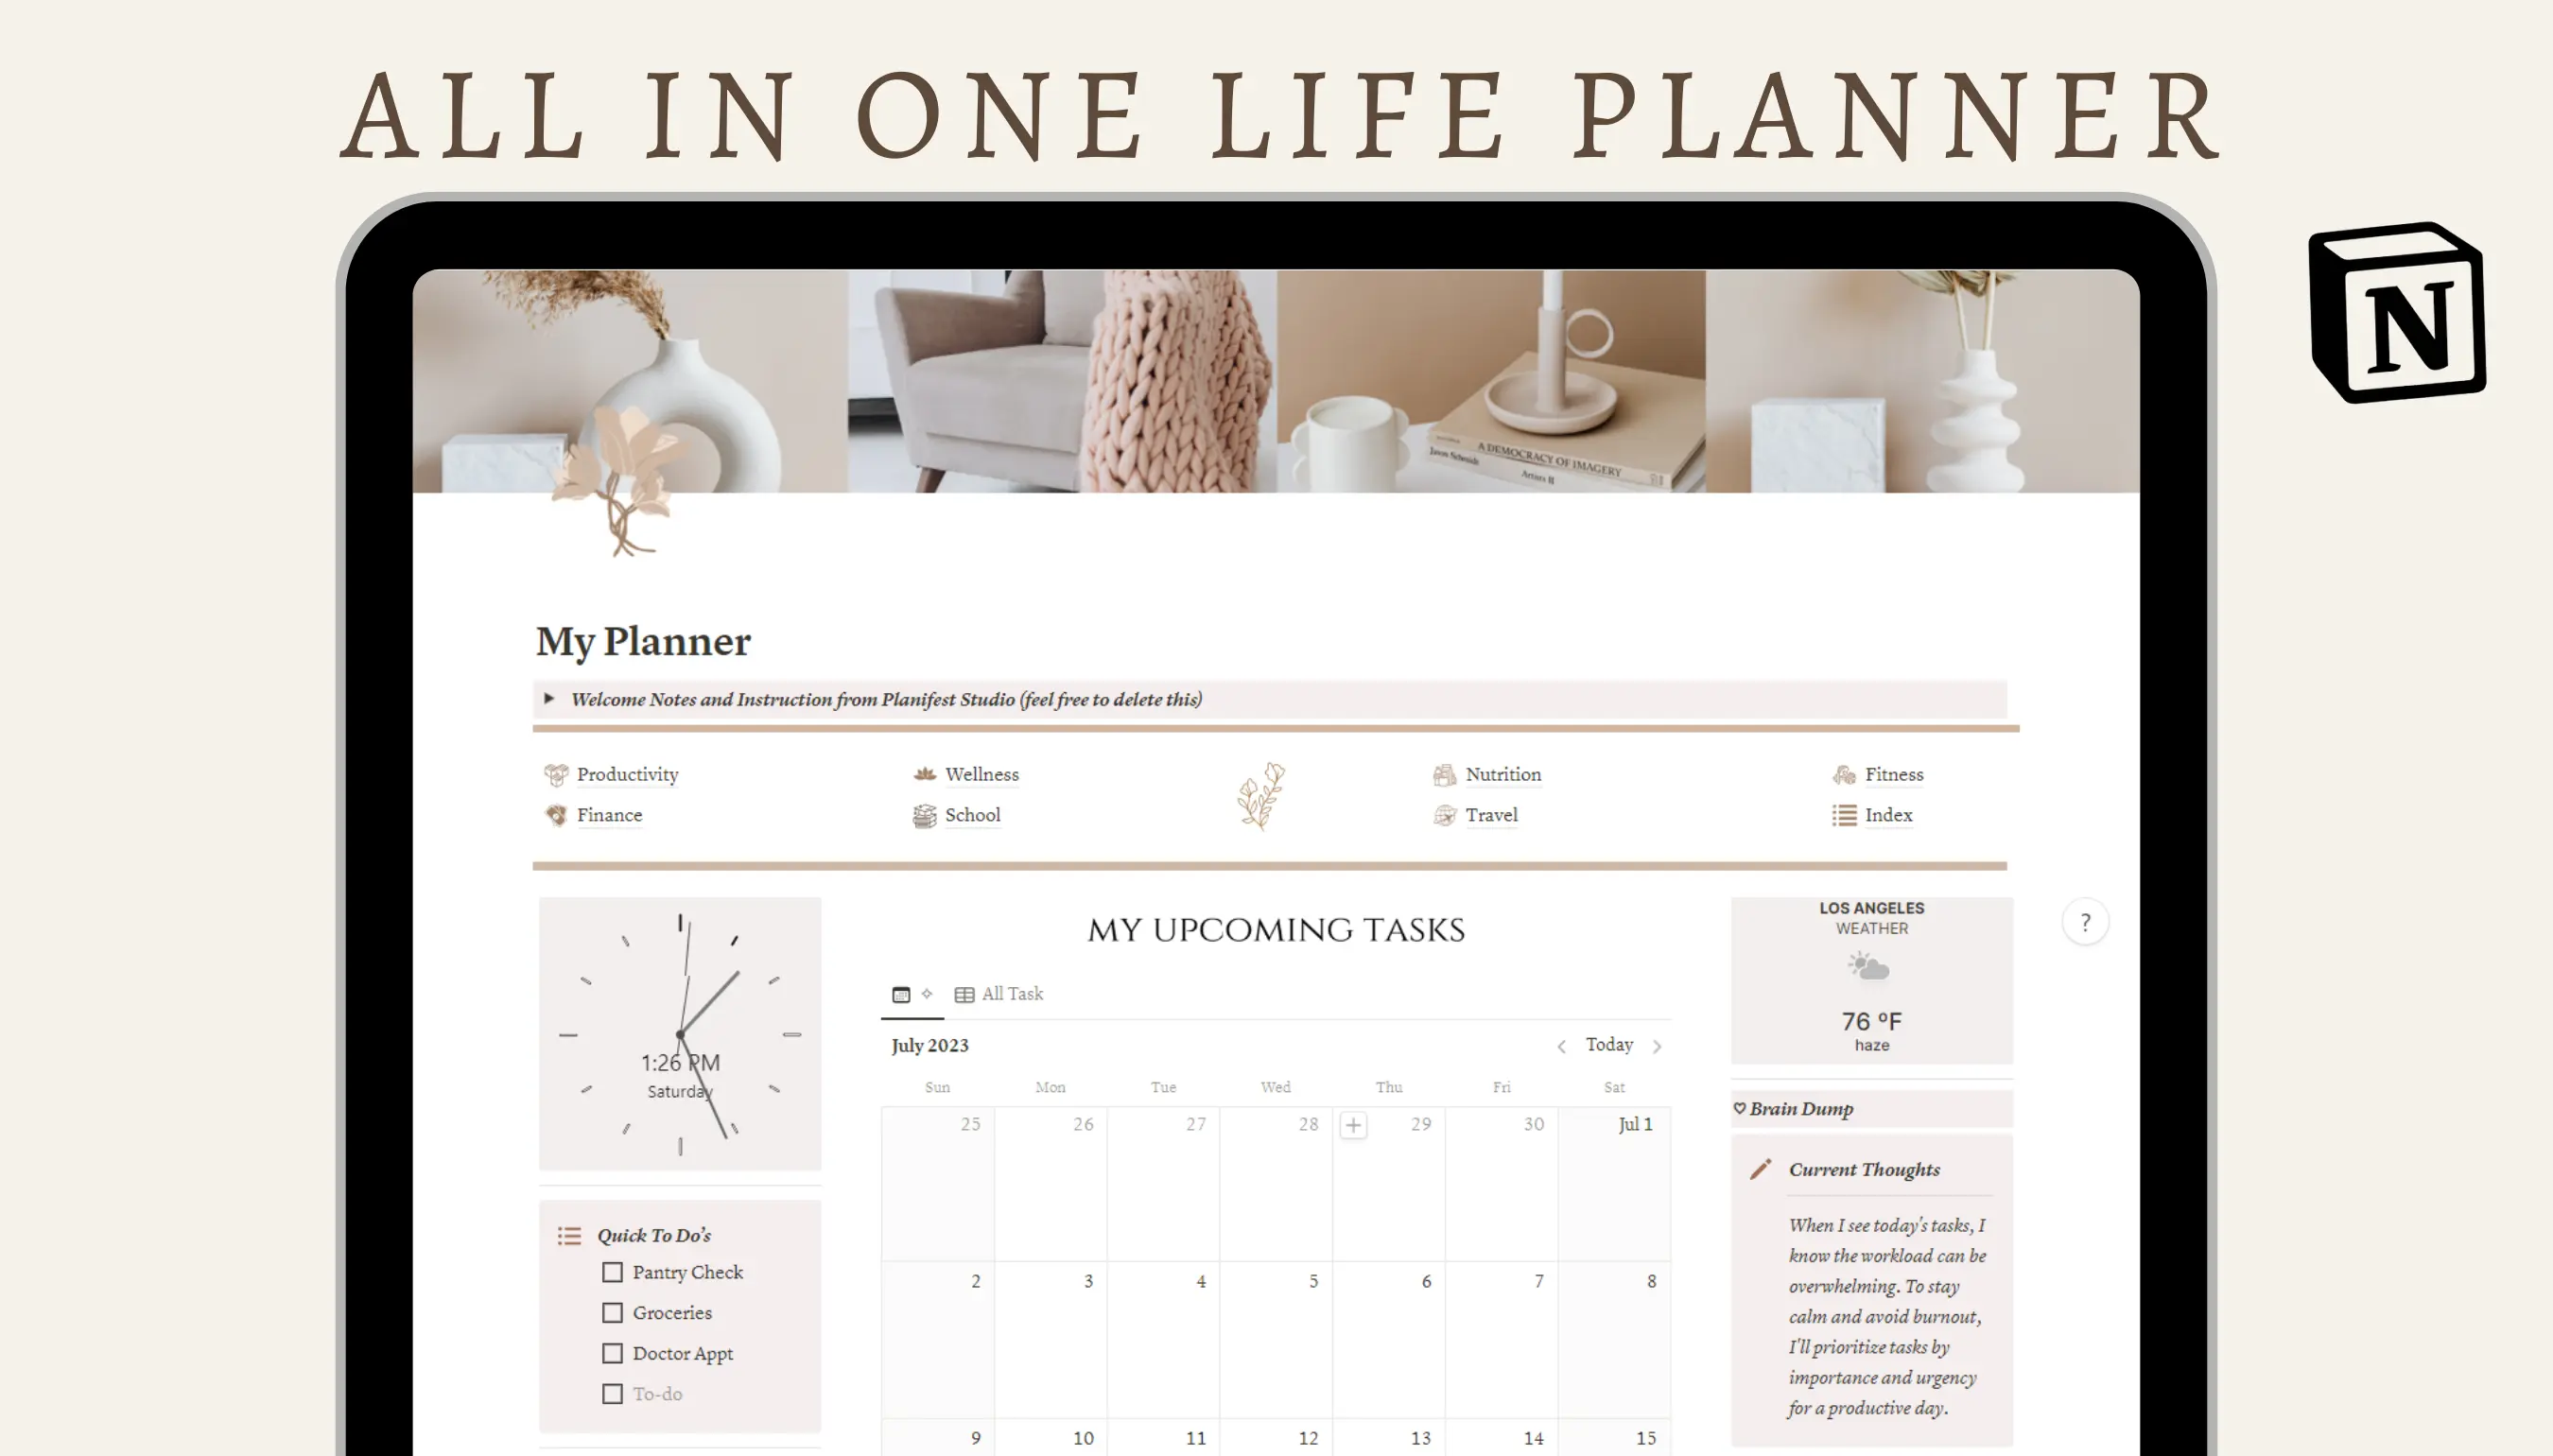 All In One Life Planner image